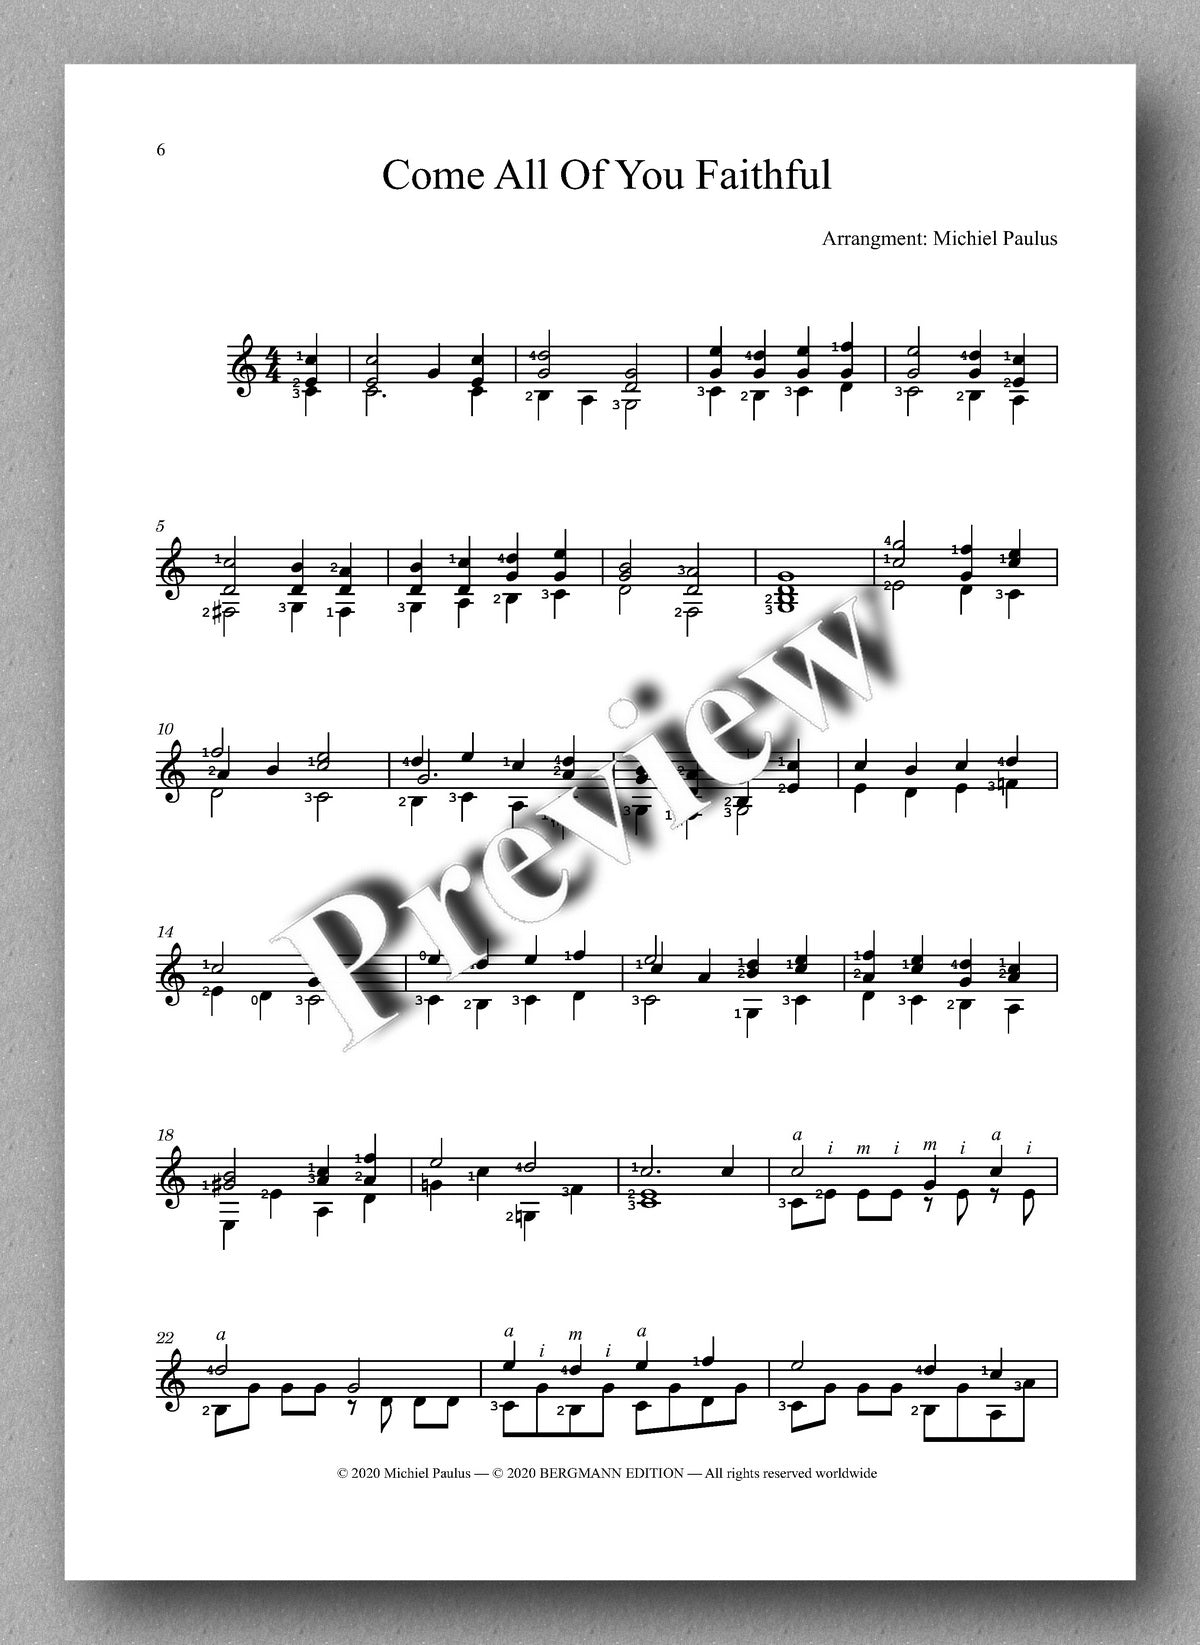 Five Christmas Carols - Preview of the music score 2